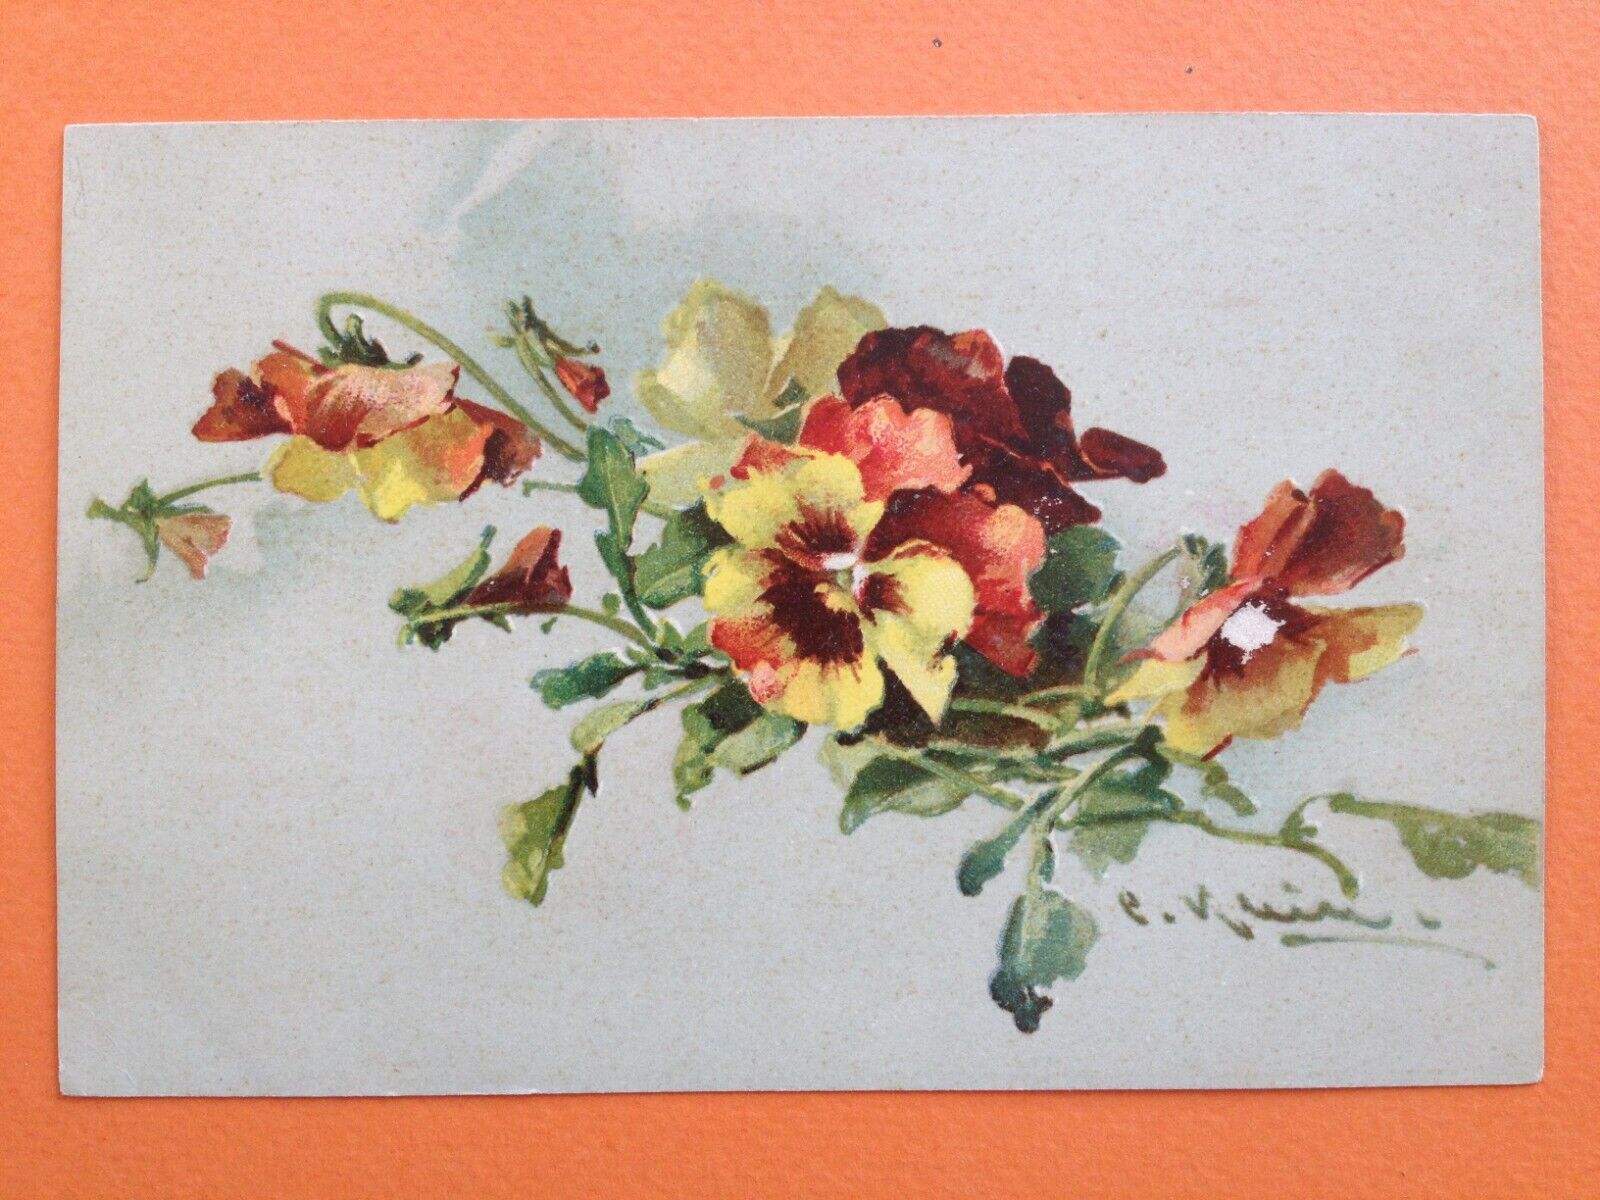 cpa Illustration Litho Signed Catherine KLEIN Flowers PANSIES Flowers THOUGHTS